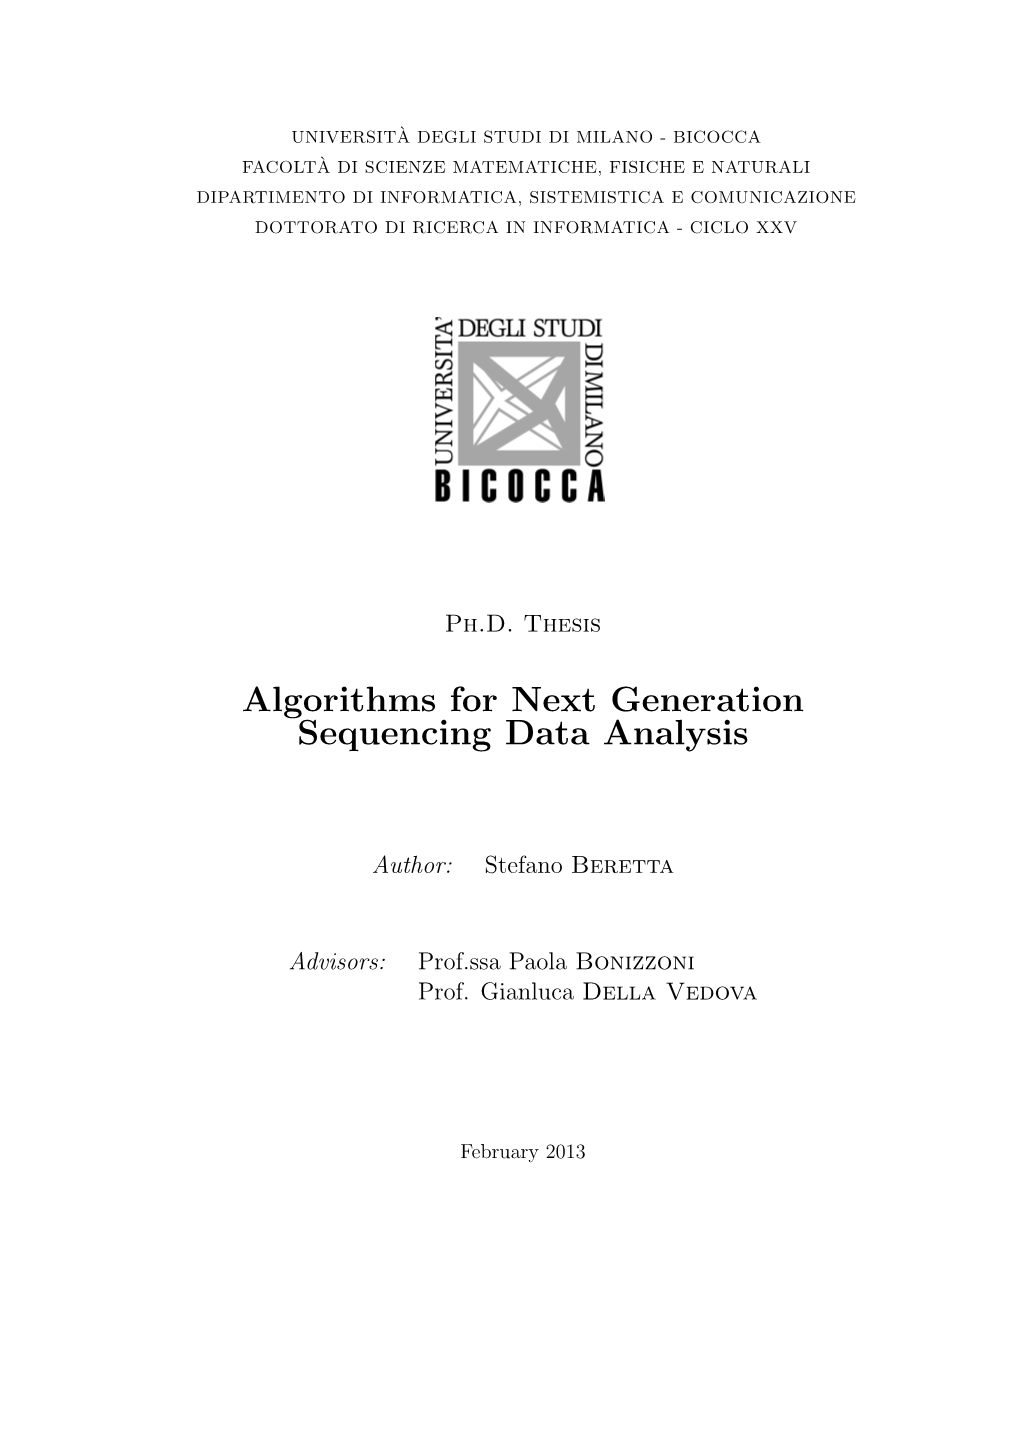 Algorithms for Next Generation Sequencing Data Analysis